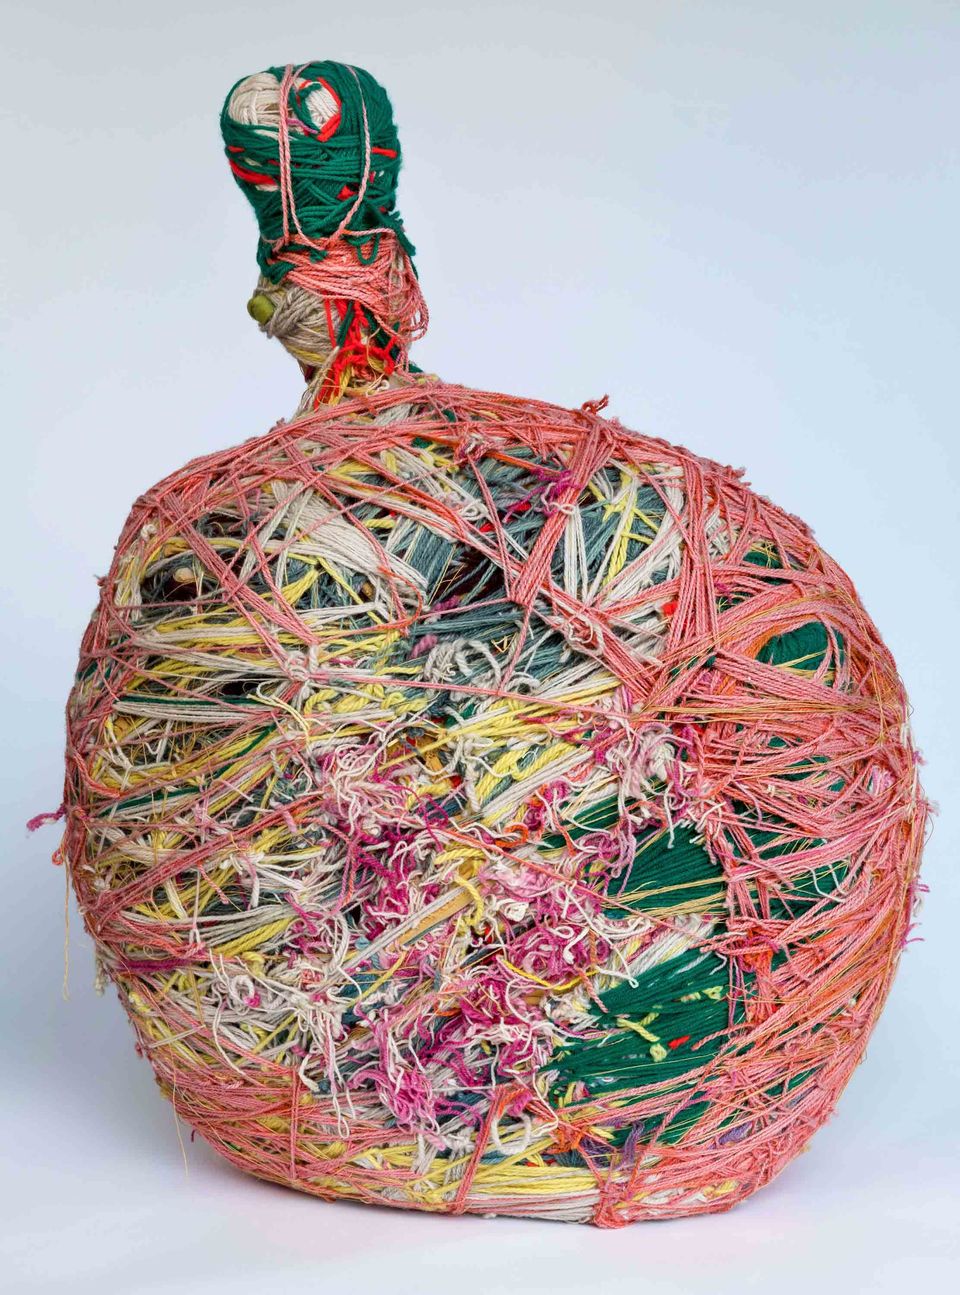 A sculpture in the shape of a bottle with wrapped pieces of string.